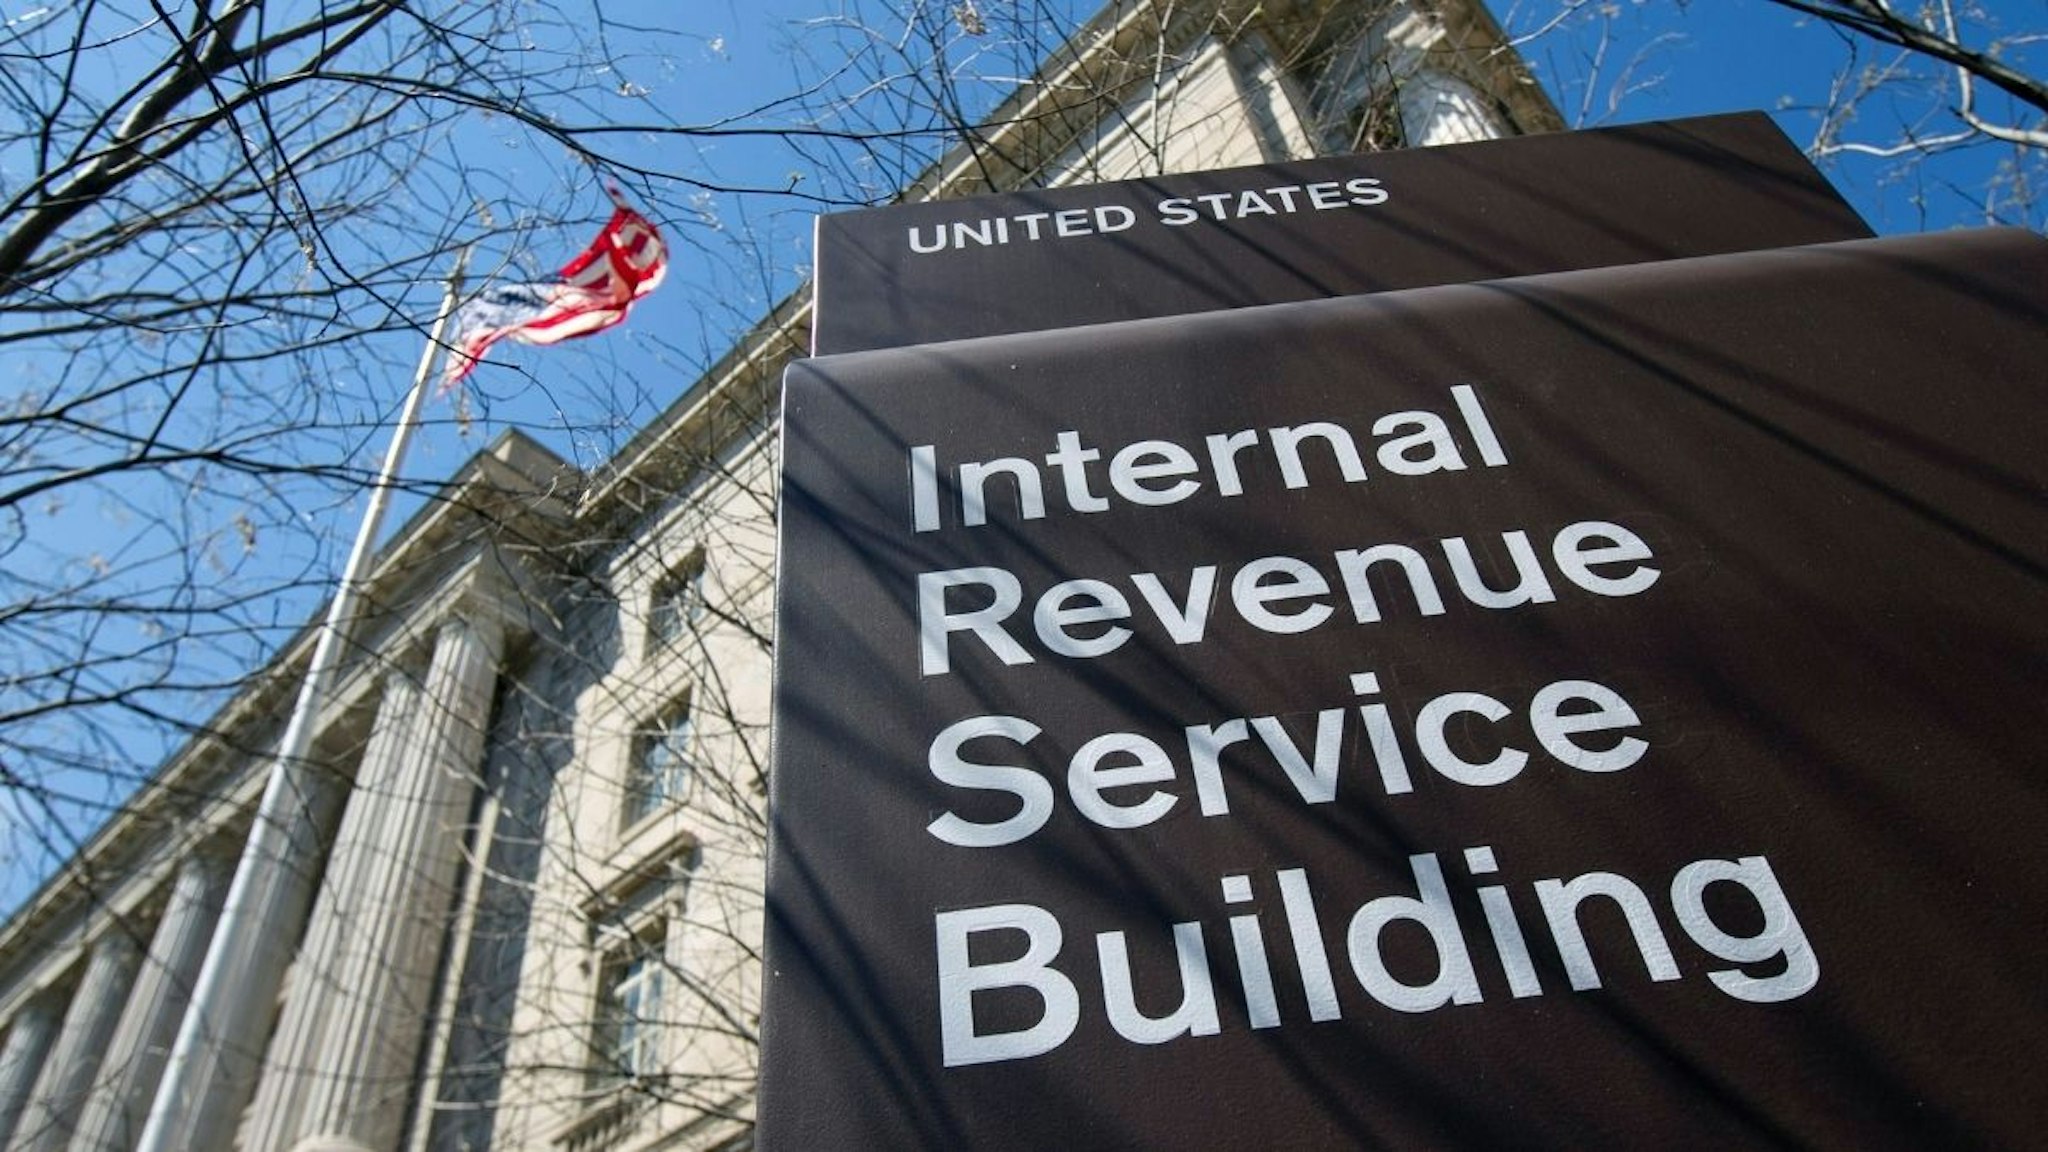 The Internal Revenue Service (IRS) building stands in Washington, D.C., U.S., on Wednesday, April 6, 2011.